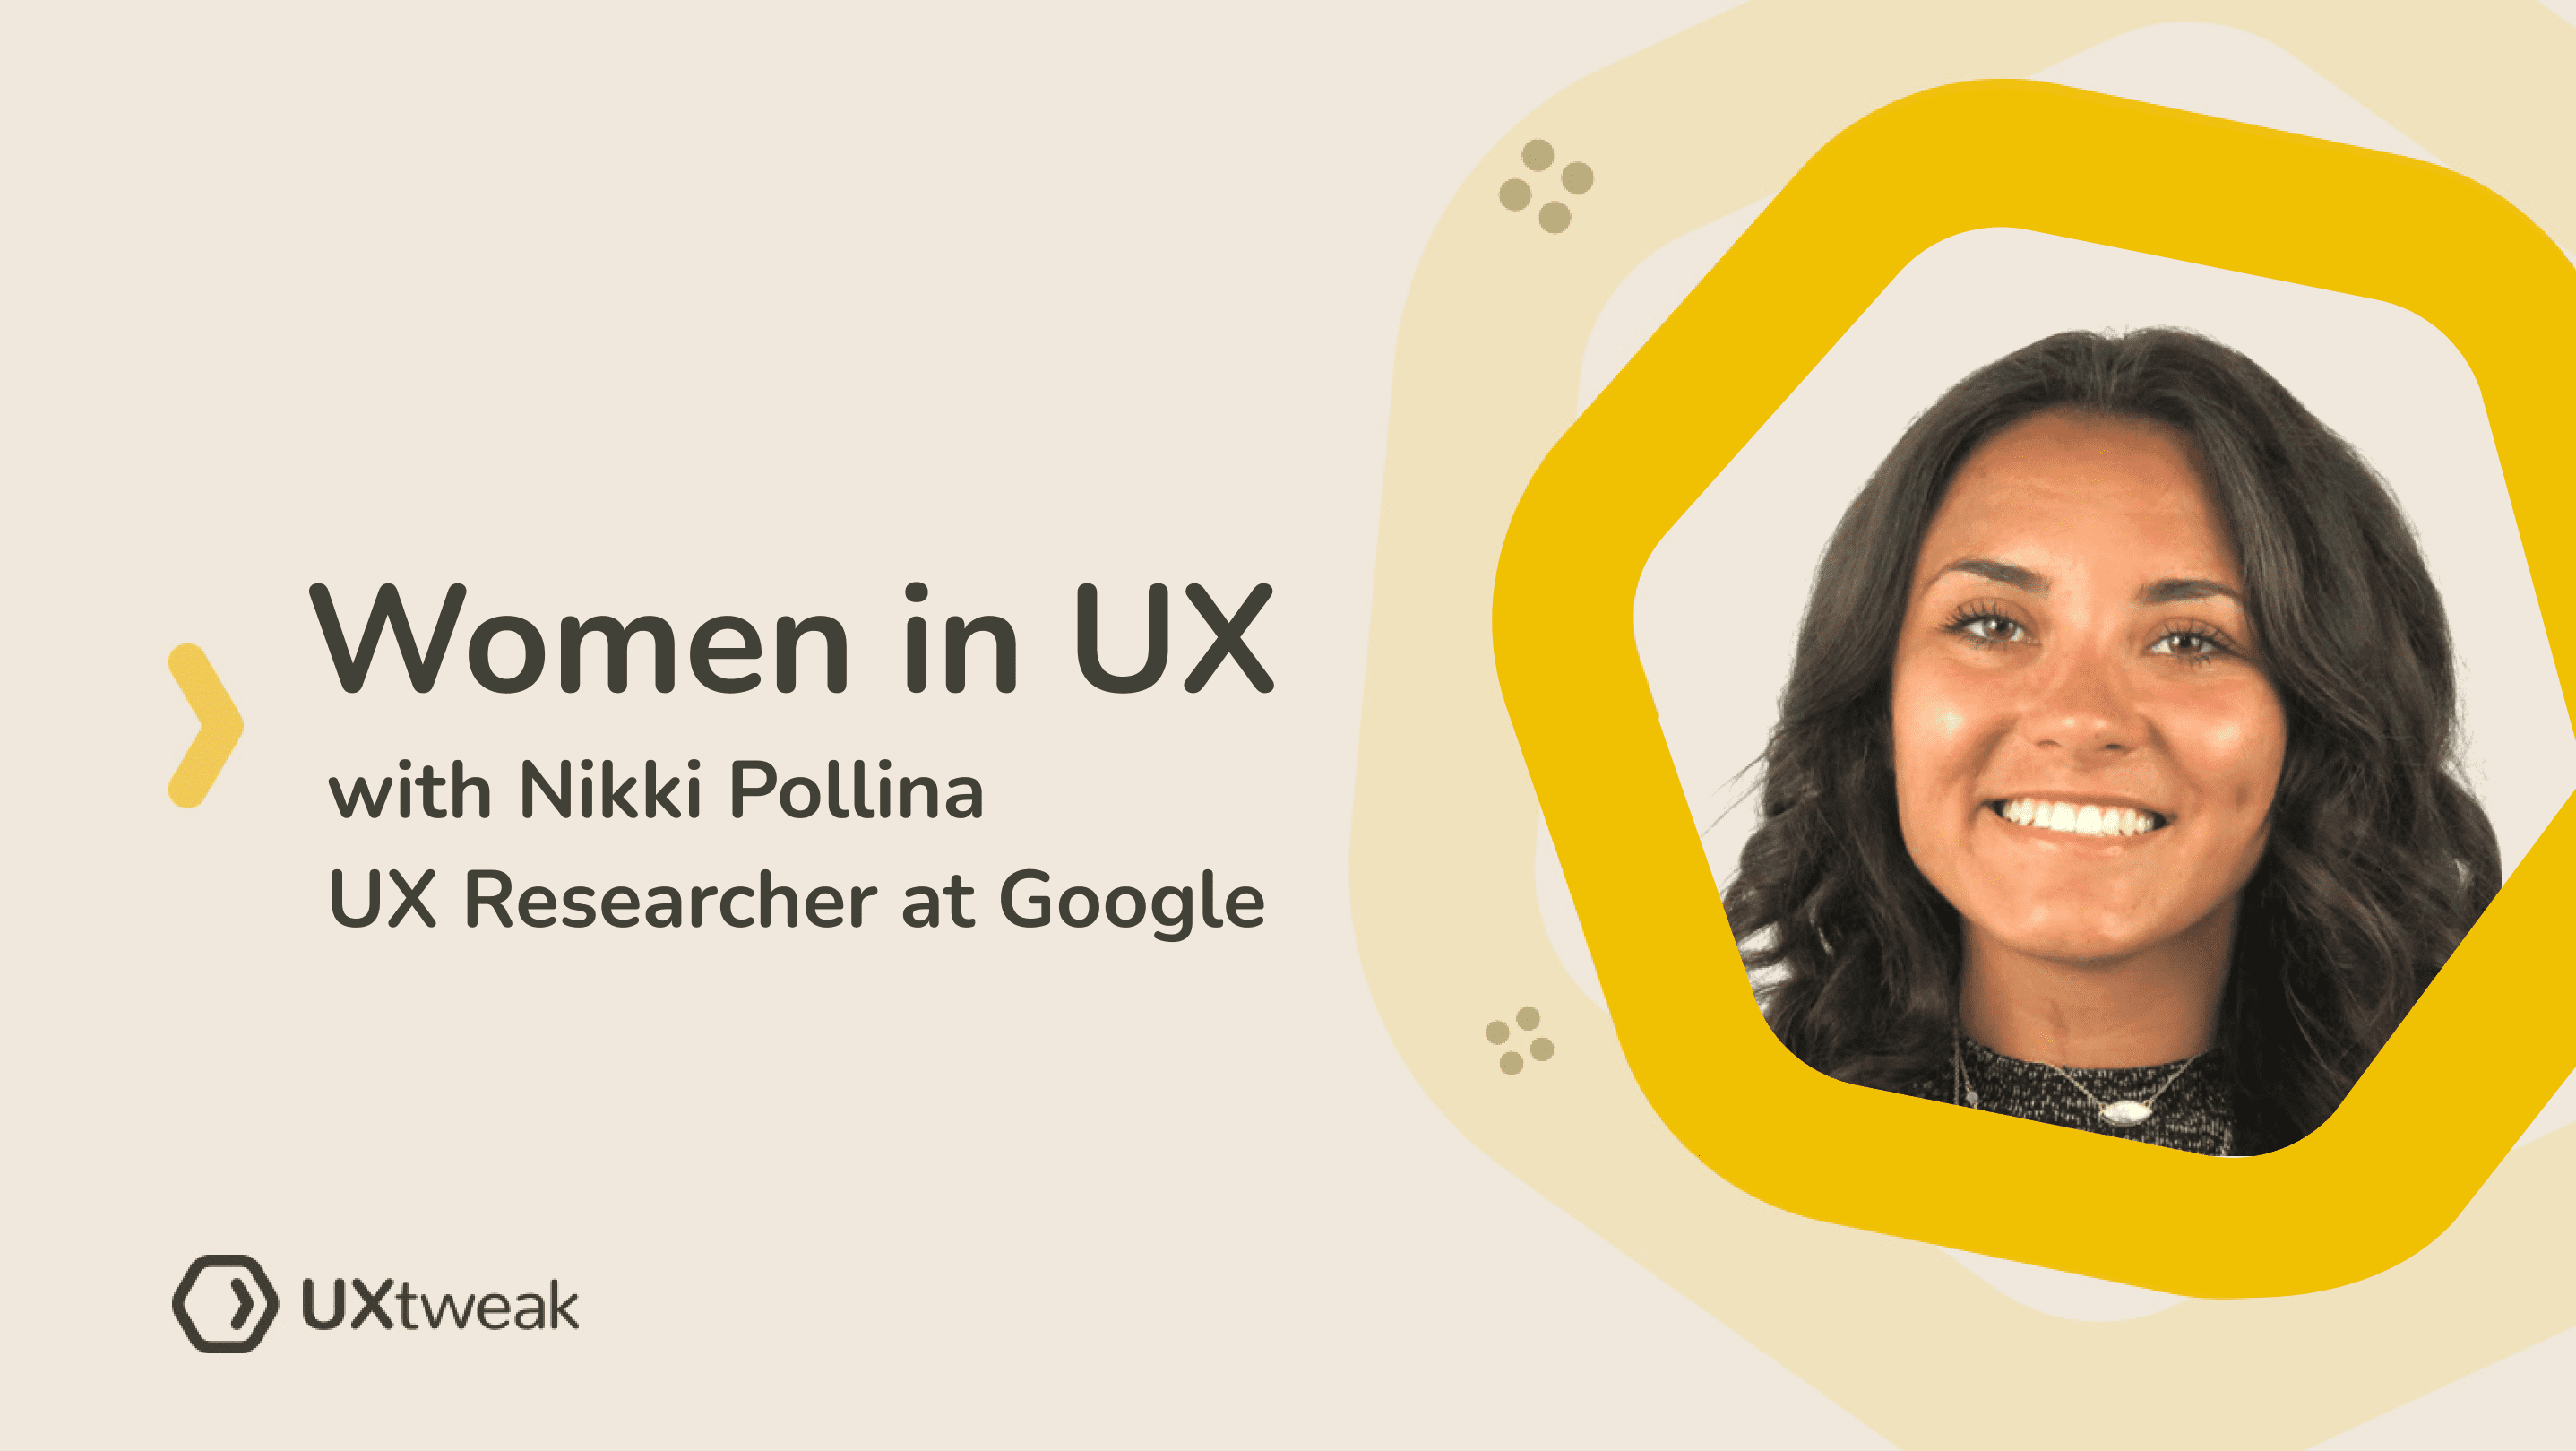 Women in UX: Nikki Pollina about working at Google and growing on TikTok